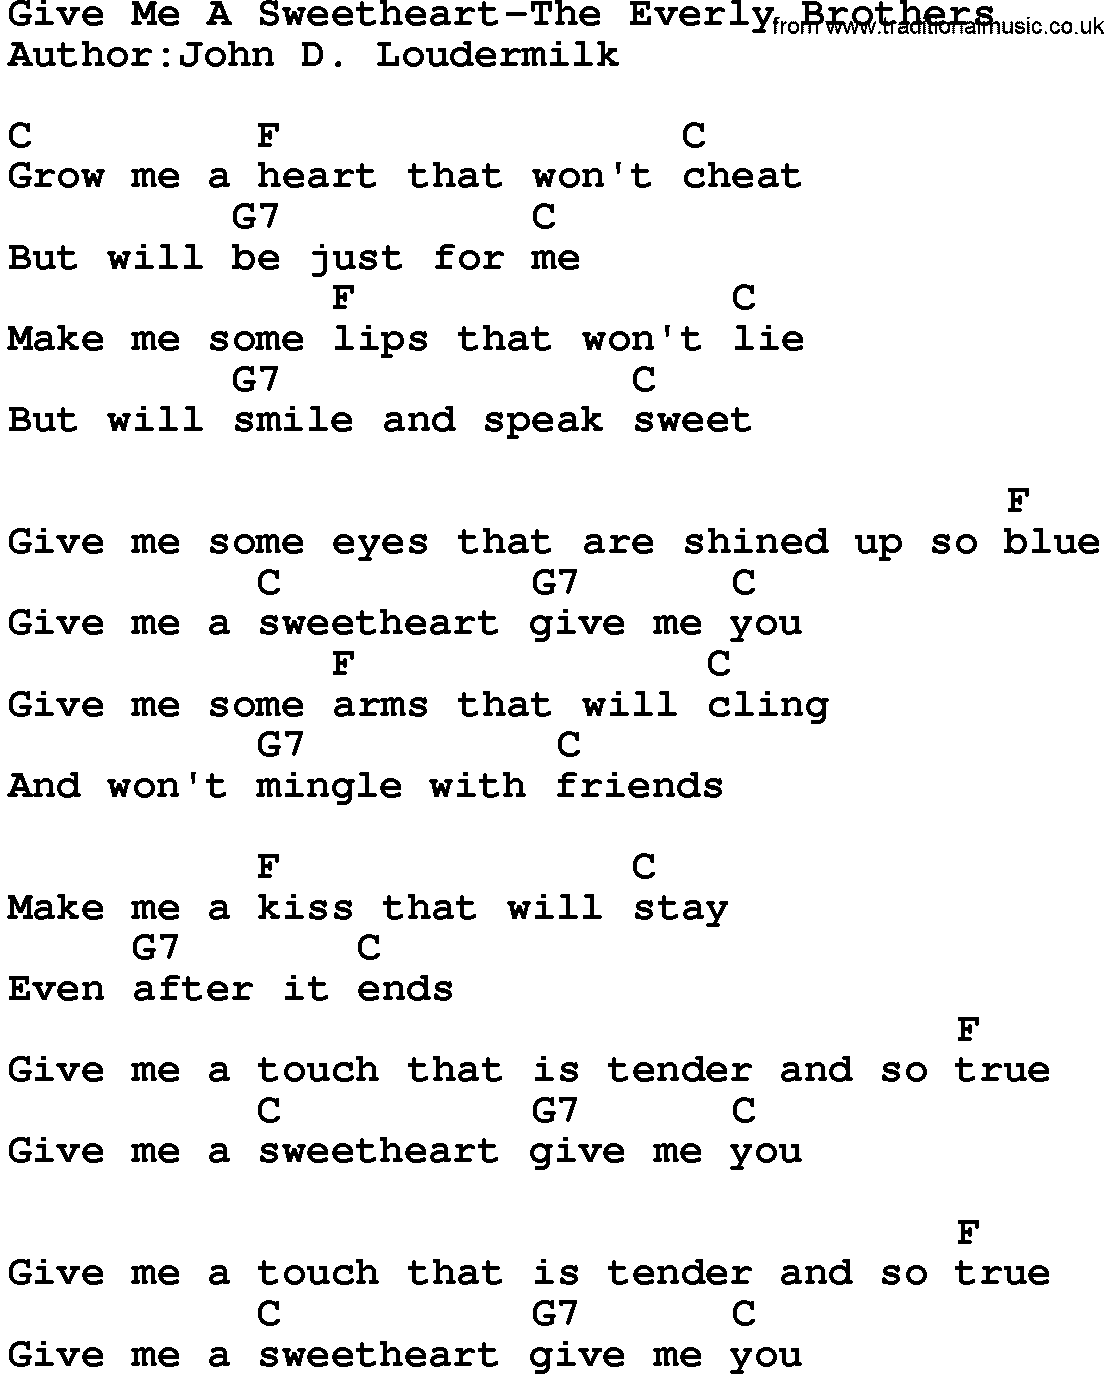 Country music song: Give Me A Sweetheart-The Everly Brothers lyrics and chords